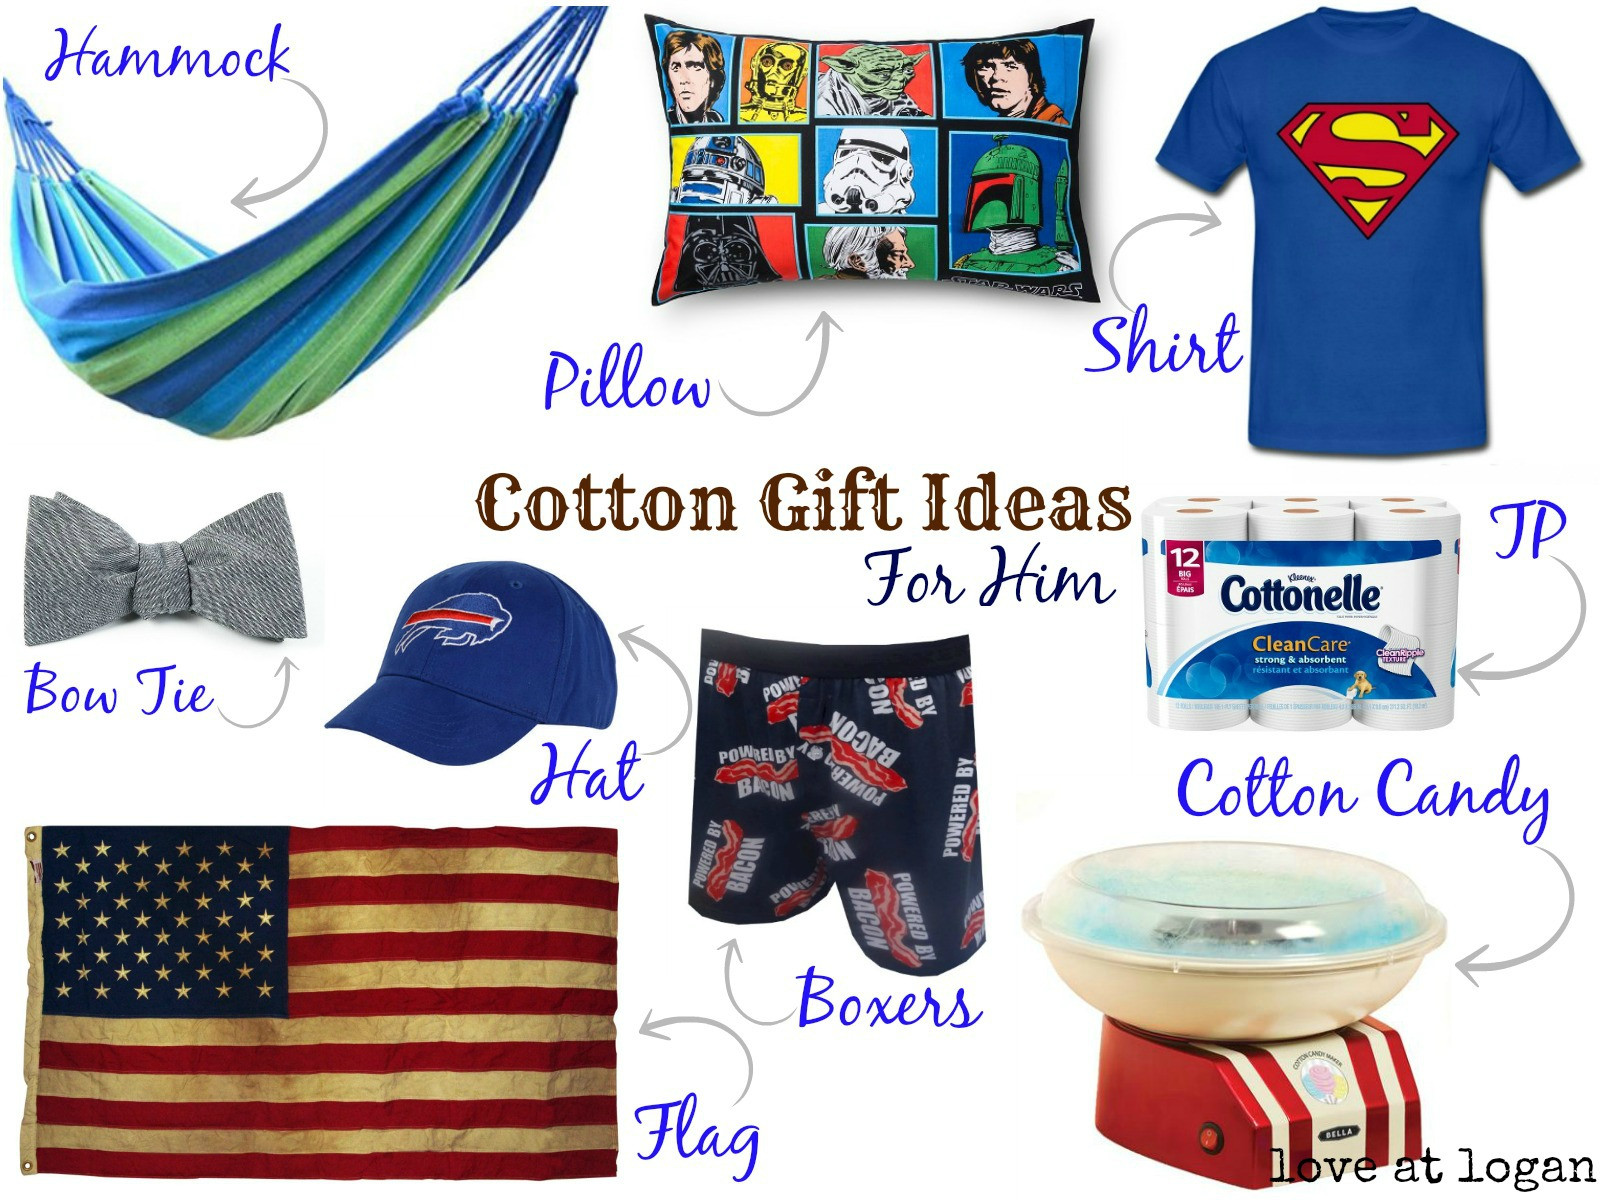 Cotton Anniversary Gift Ideas For Him
 Love at Logan Second Anniversary Cotton Gift Ideas